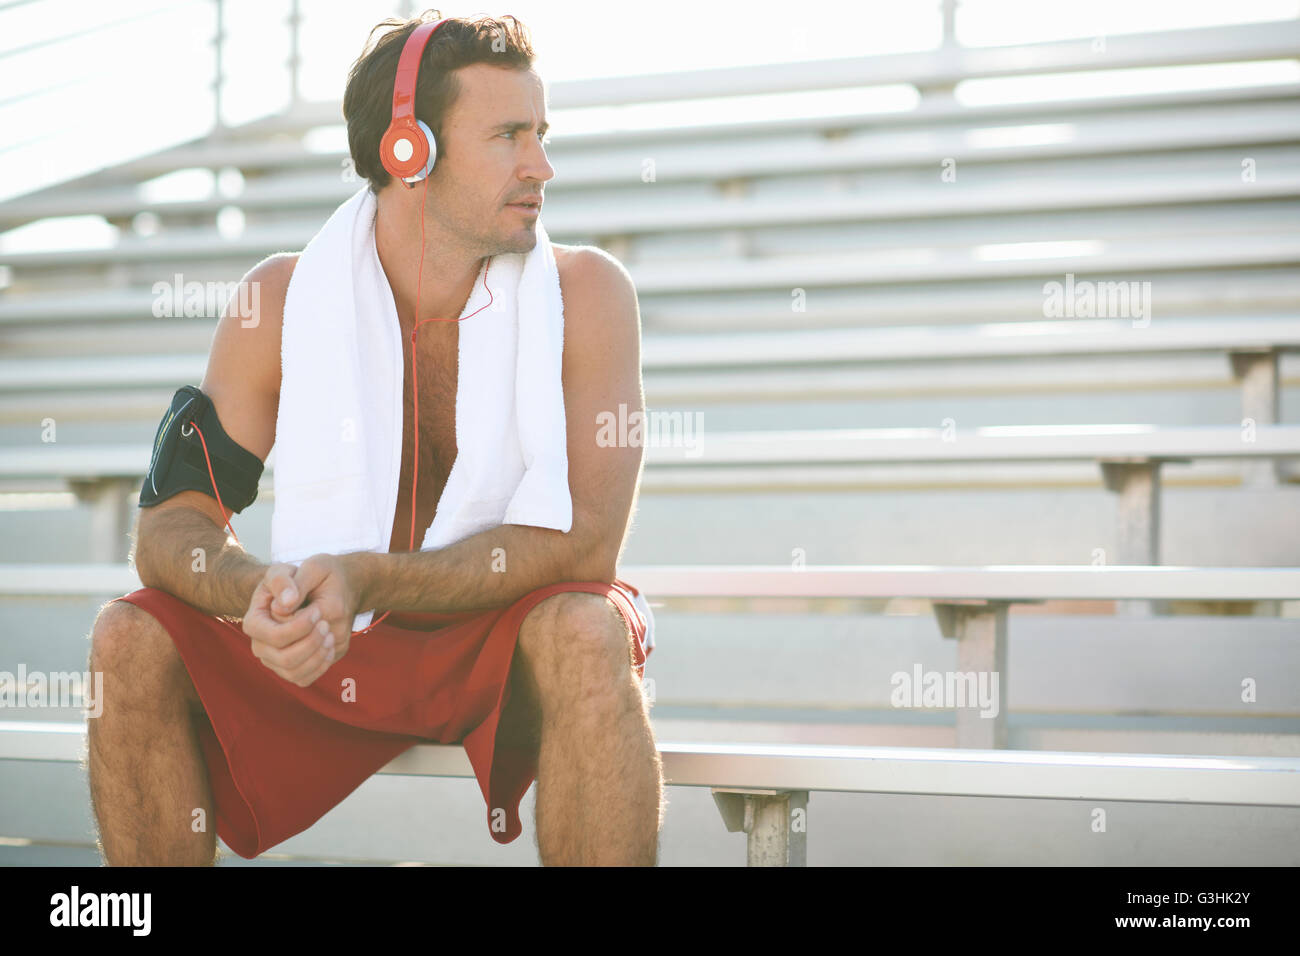 Mid adult man sitting on bench, taking a break from exercise, wearing headphones, towel around neck Stock Photo